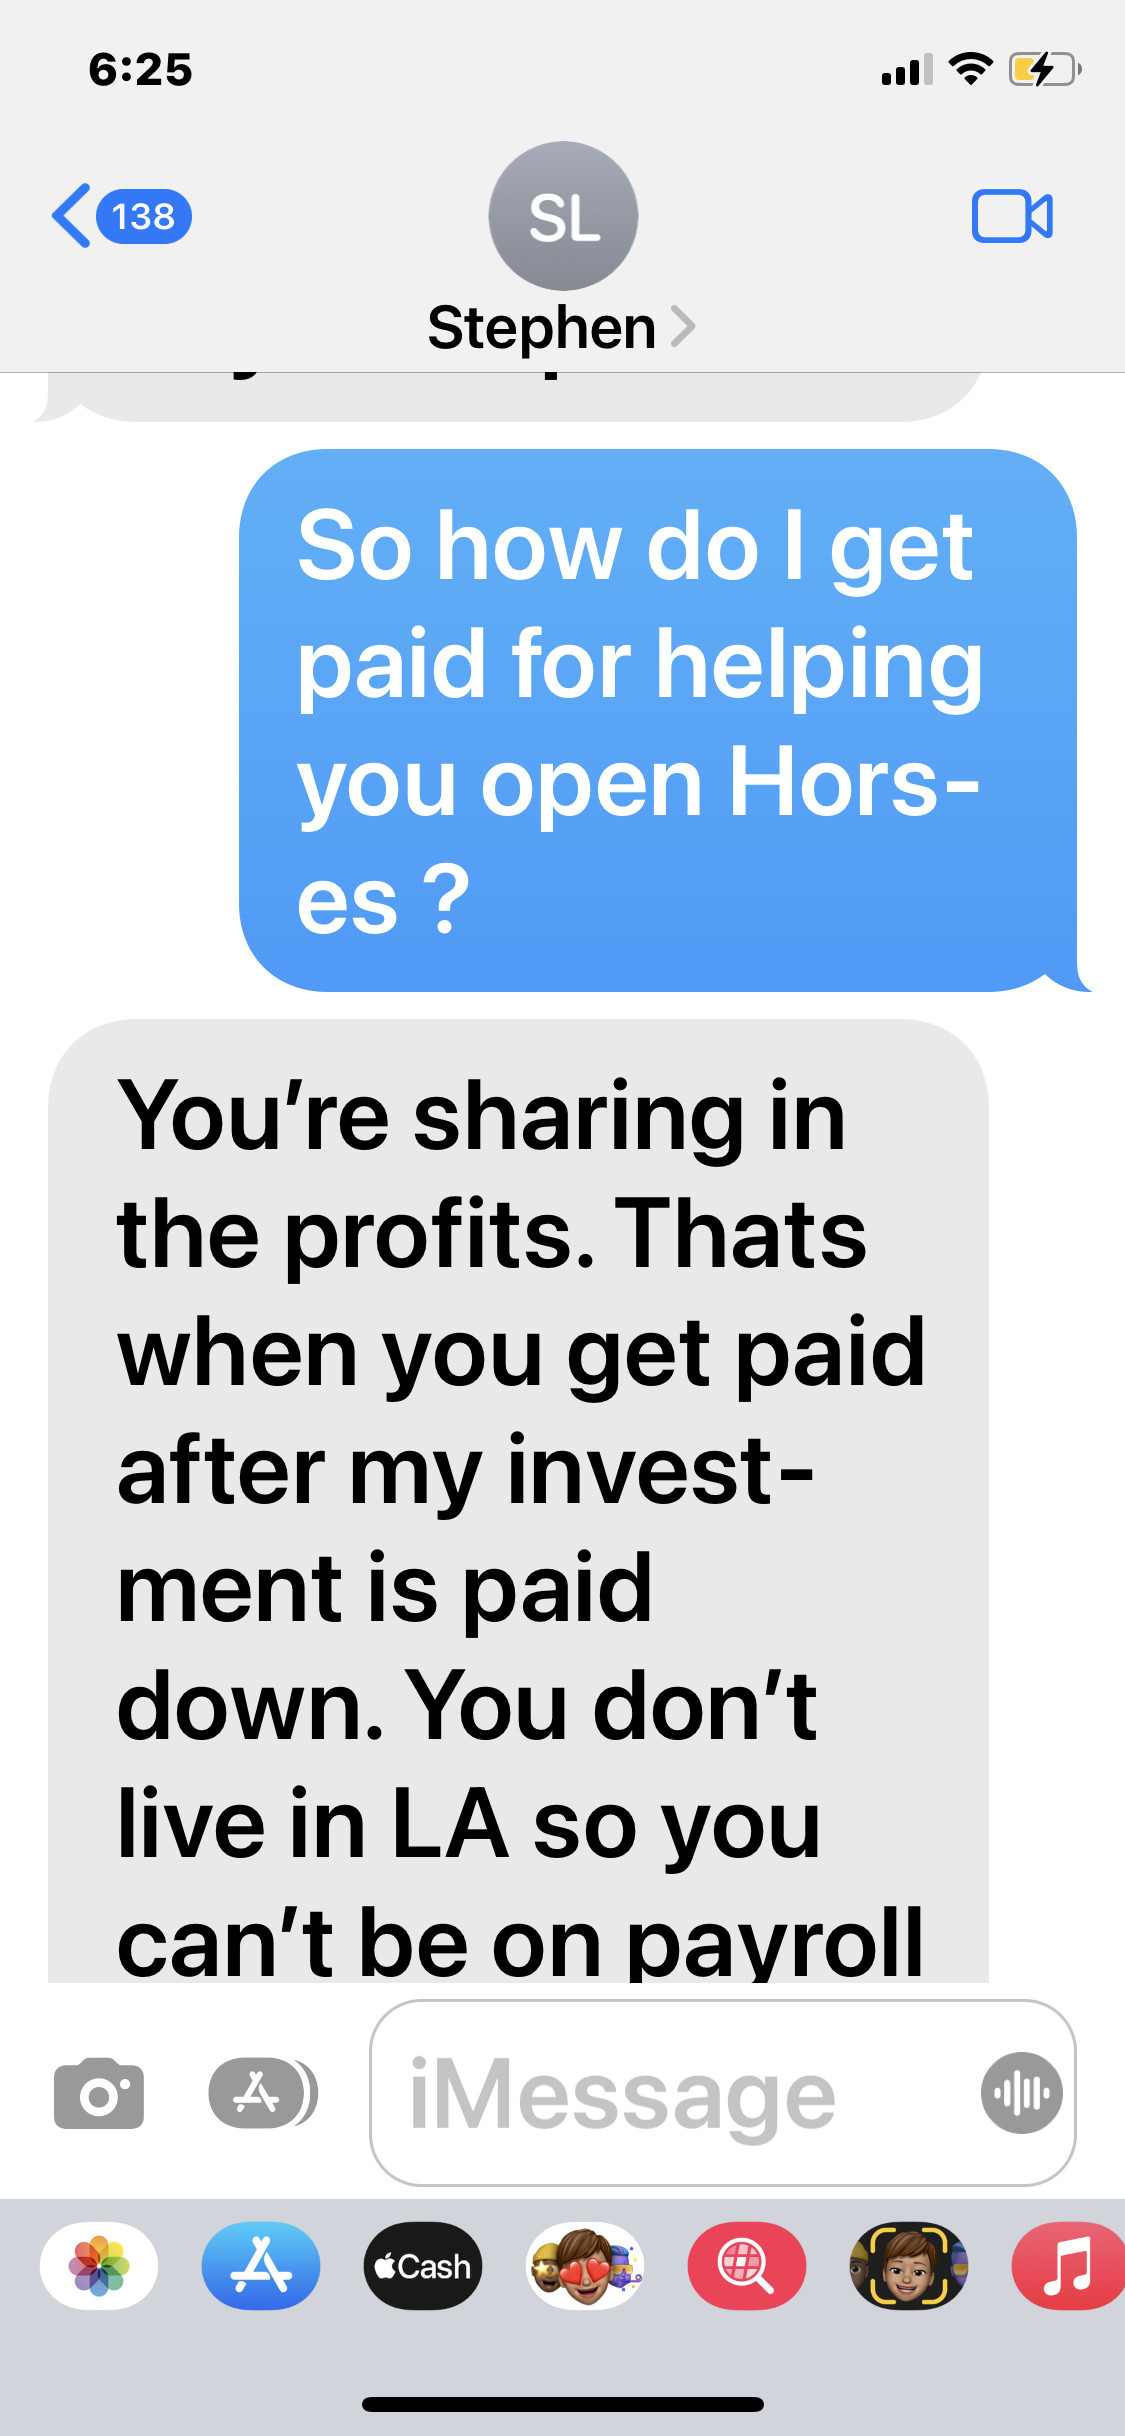 “So how do I get paid for helping you open Horses ?” “You’re sharing in the profits. Thats when you get paid after my investment is paid down. You don’t live in LA so you can’t be on payroll” the exchange reads.